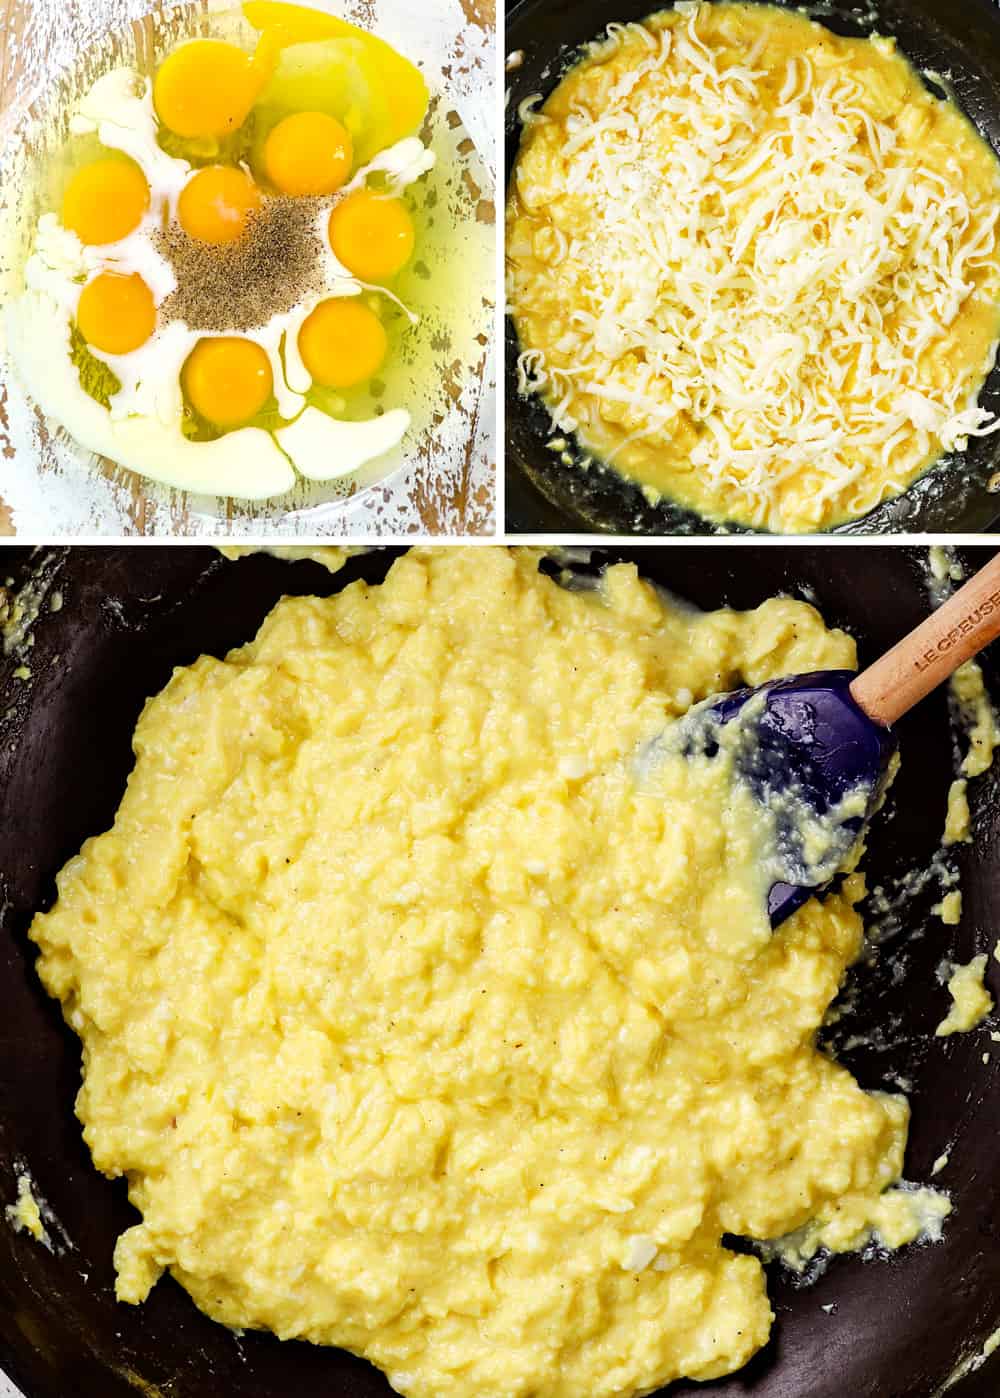 showing how to make breakfast sandwiches by scrambling eggs with cheese